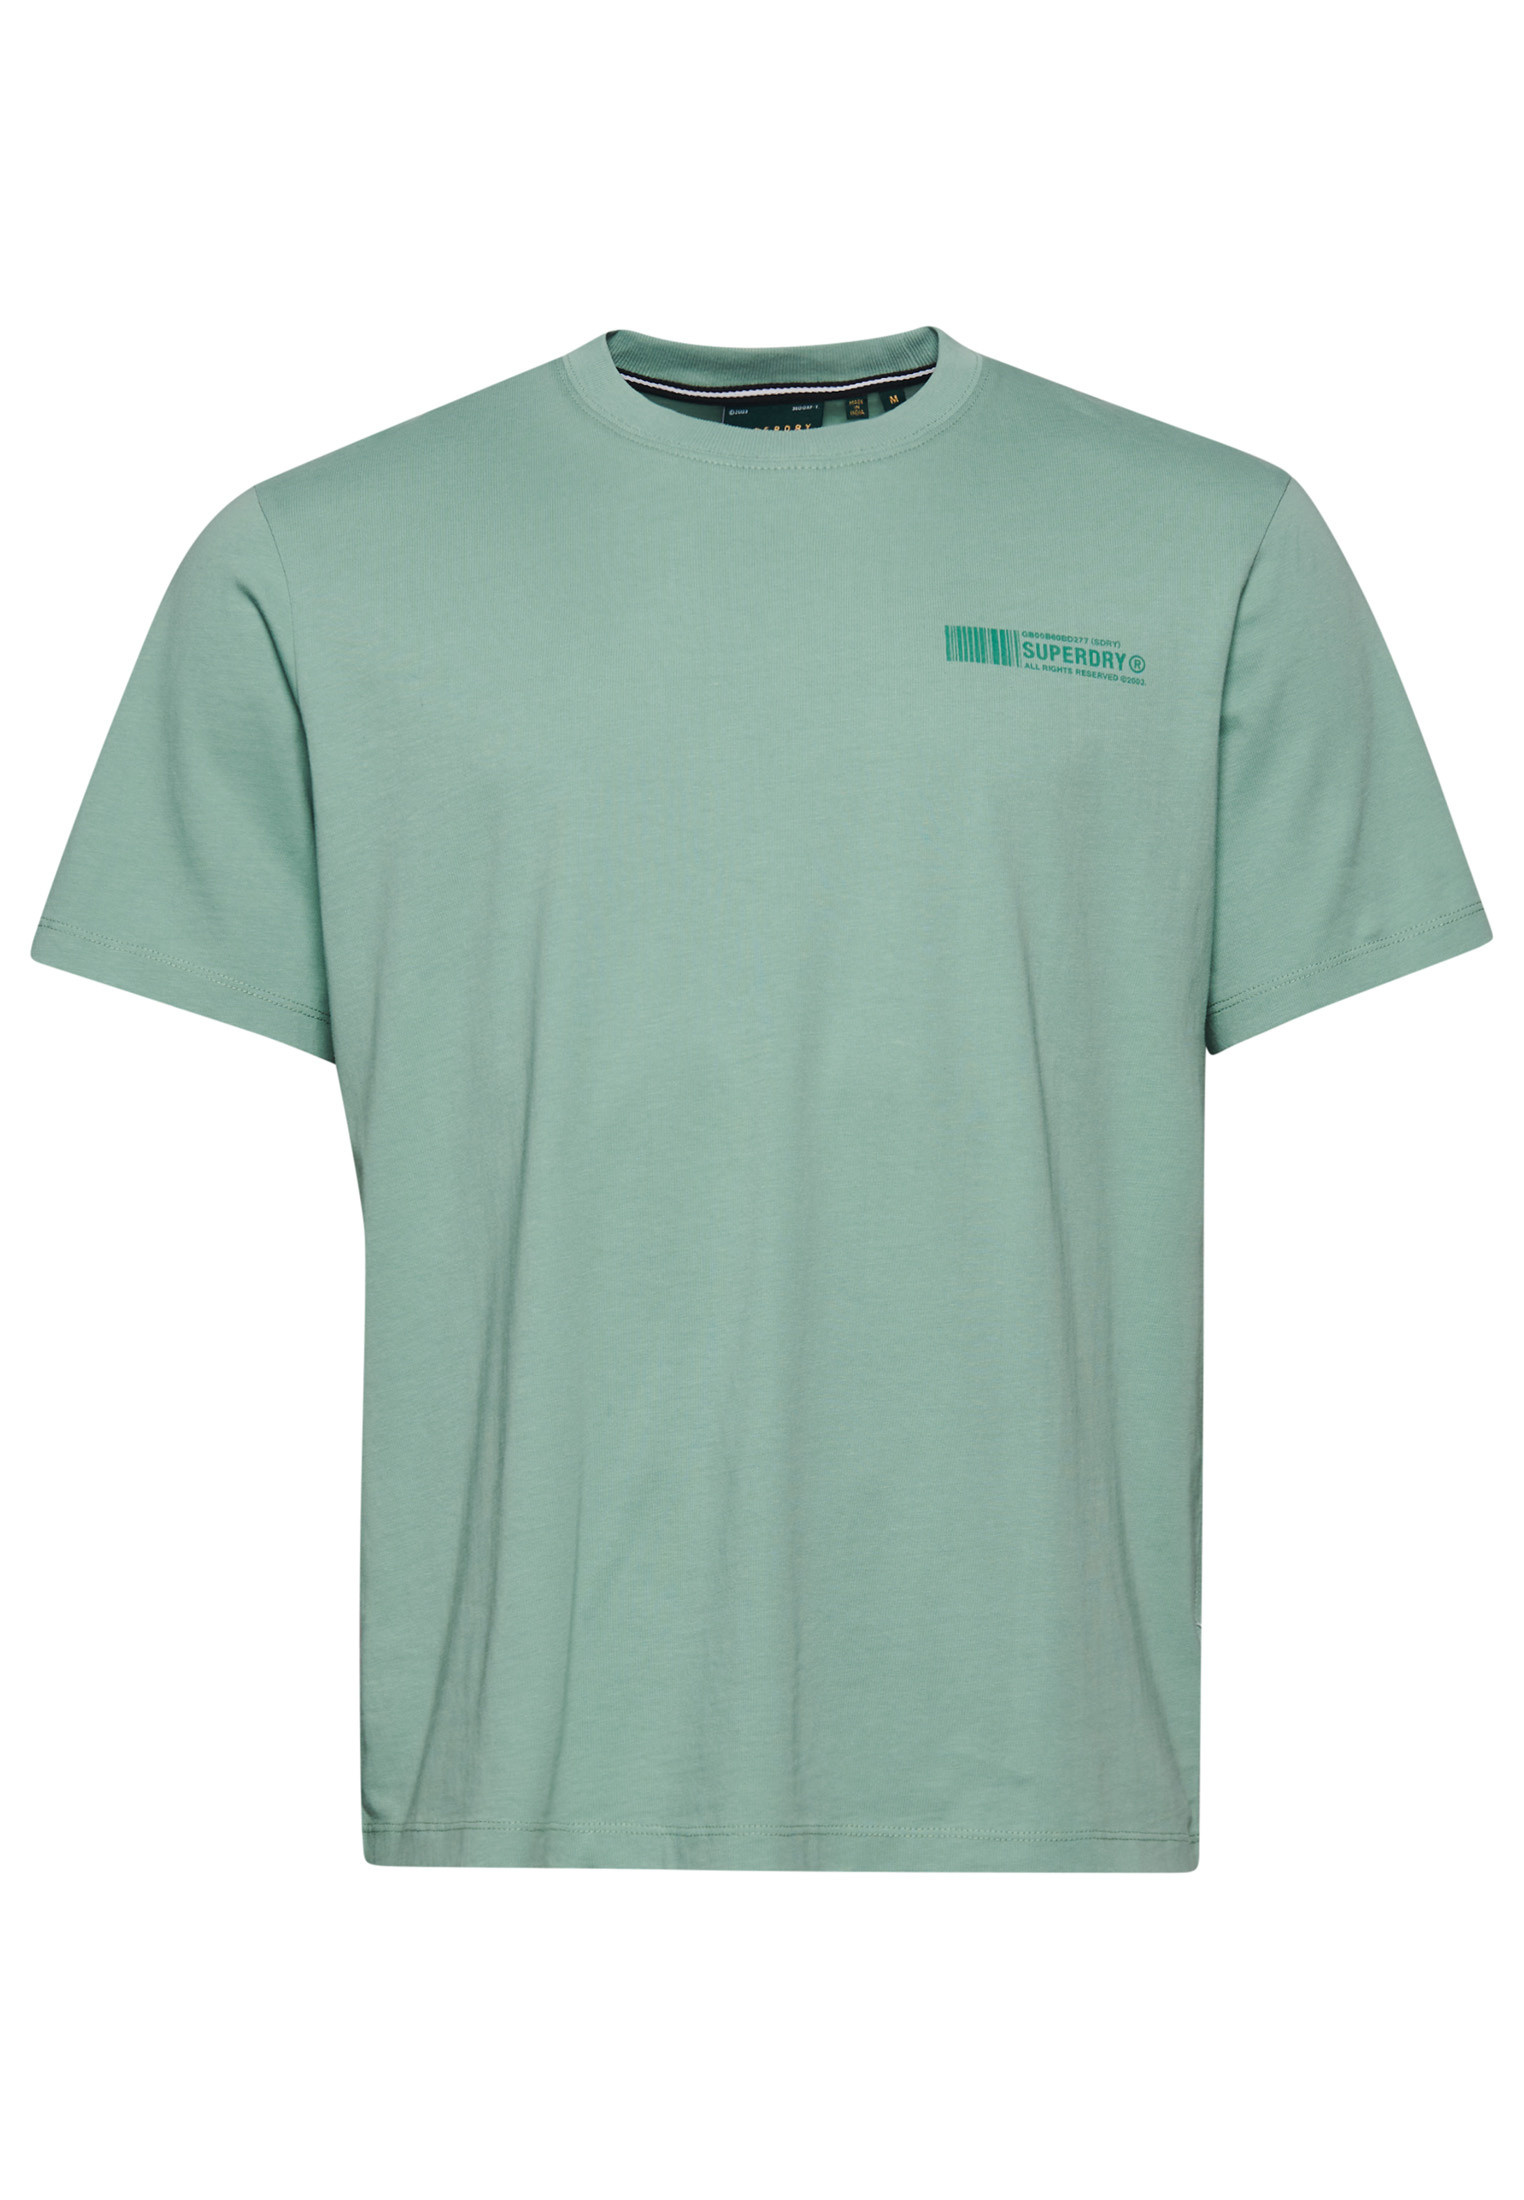 Superdry - Basic cotton t-shirt with micro barcode logo, Light Green, large image number 0